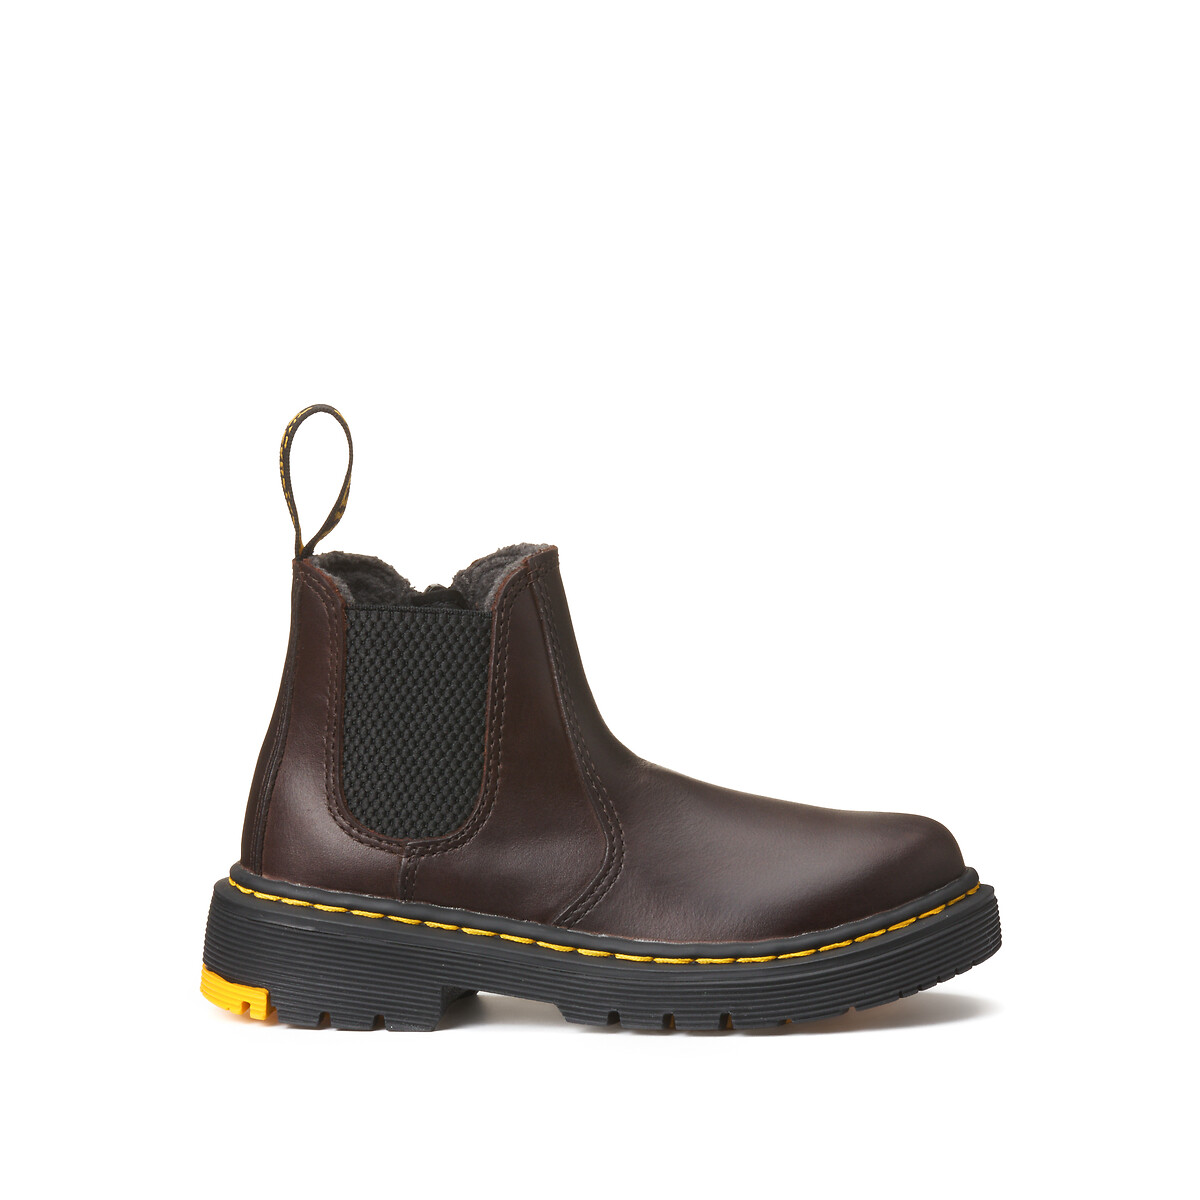 Image of Kids 2976 J Wintergrip Chelsea Boots in Leather